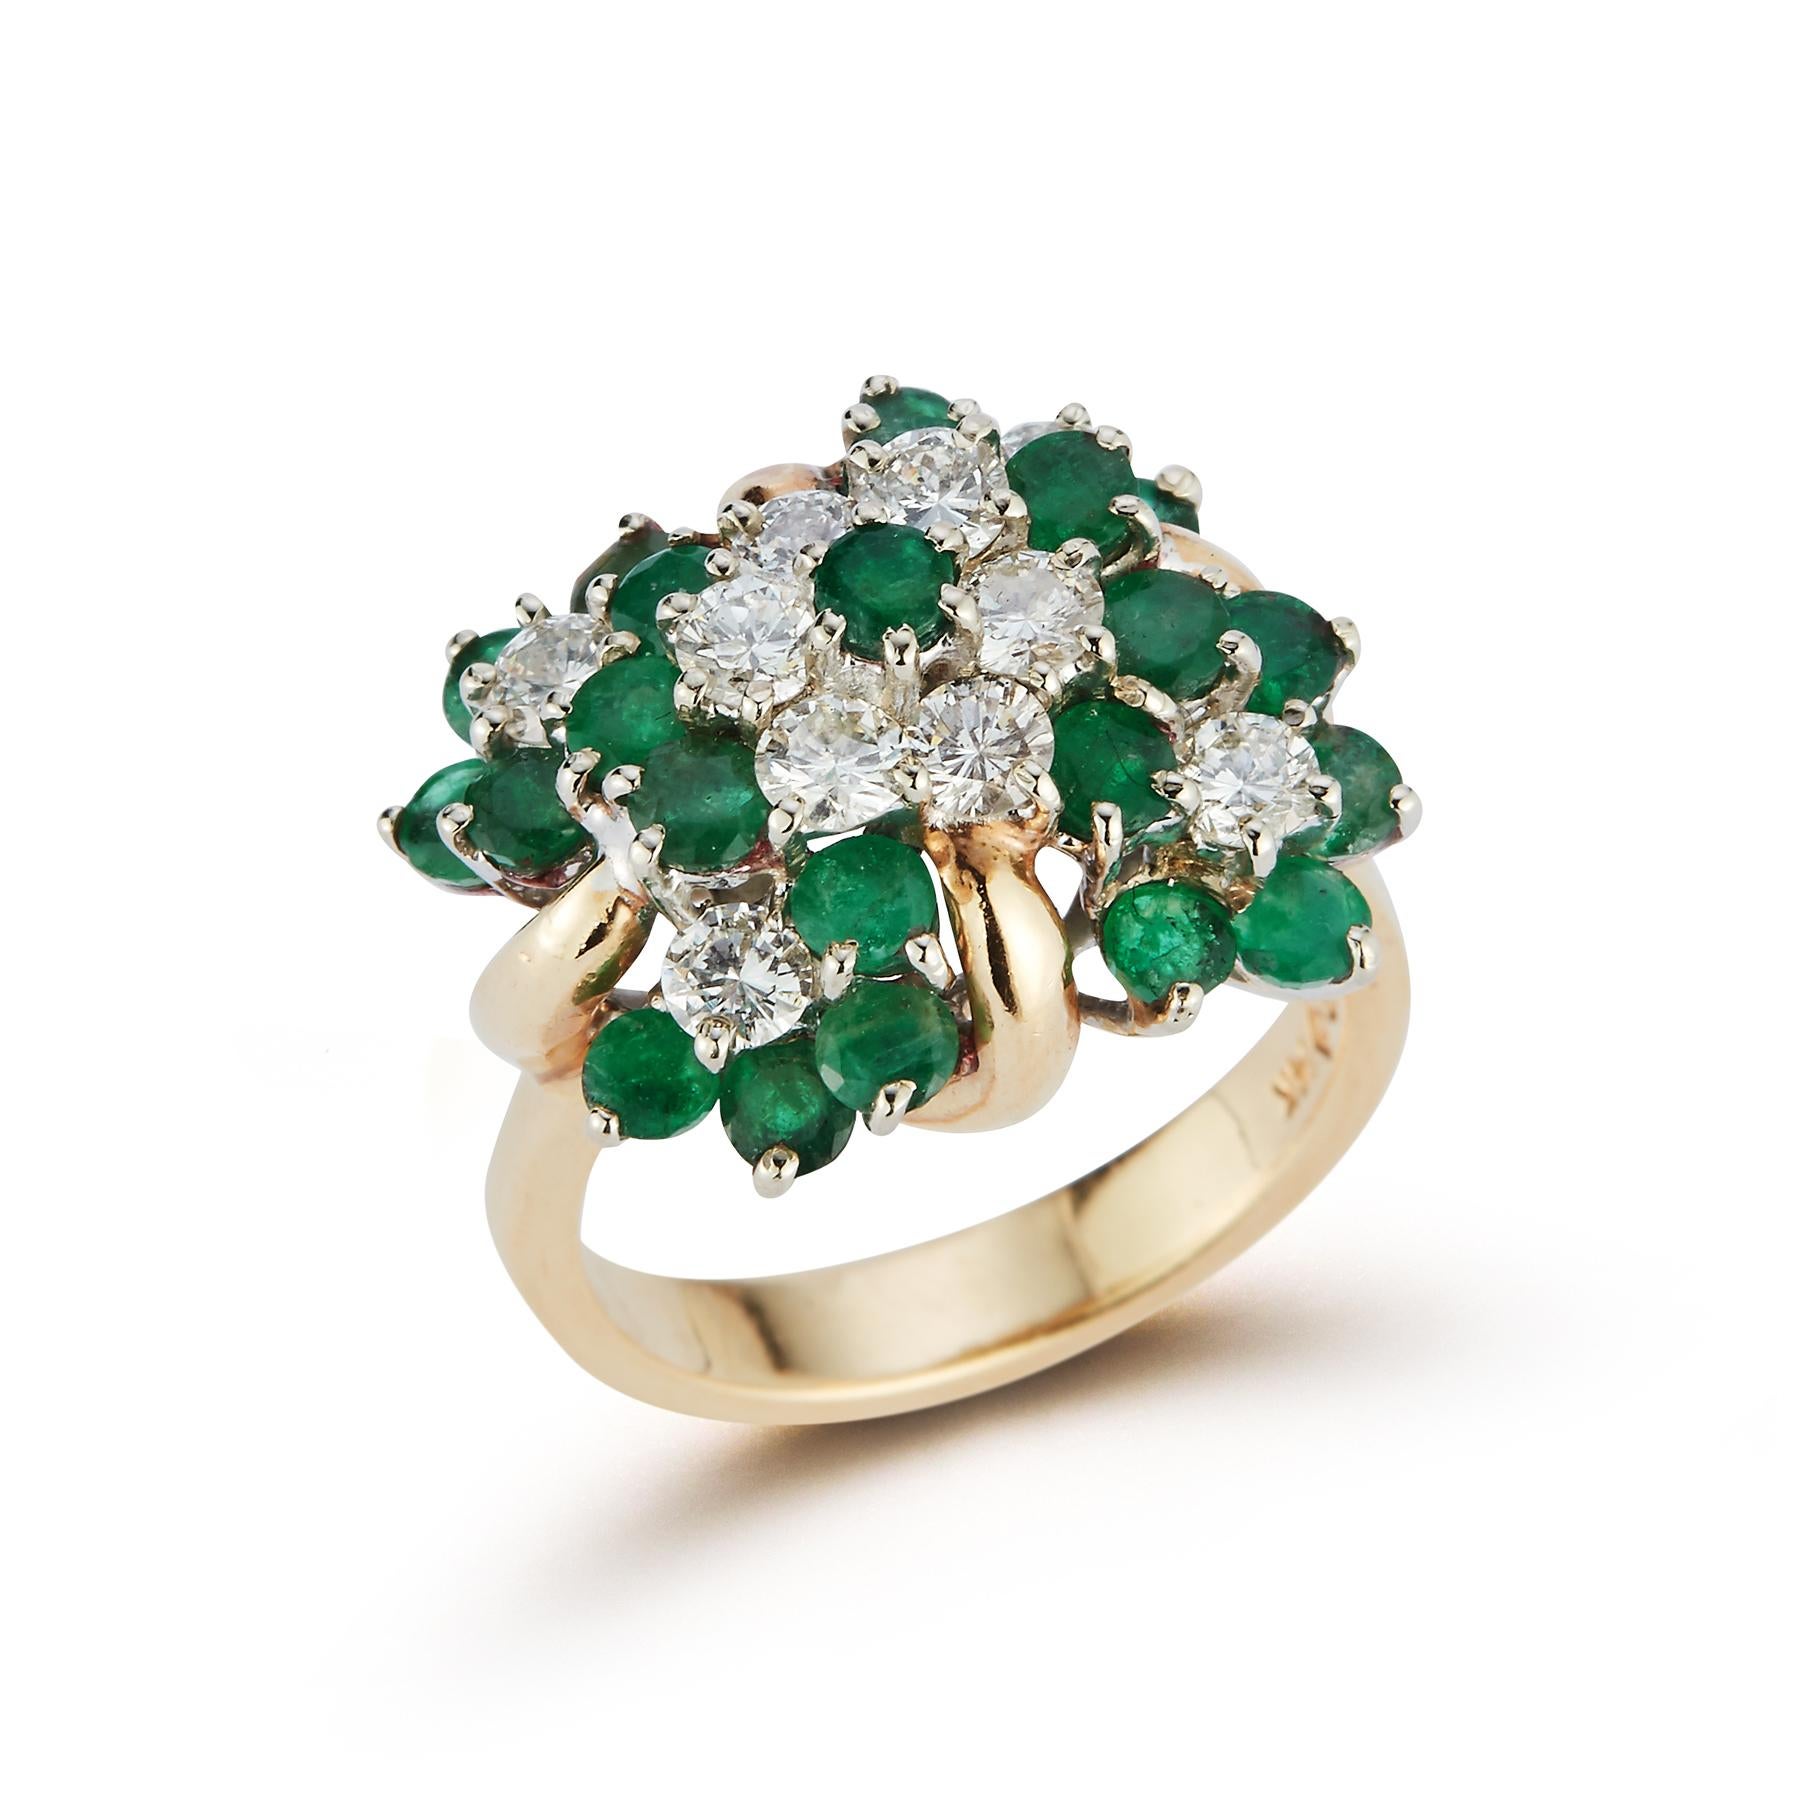 Emerald & Diamond Flower Cluster Ring 
14K yellow gold ring with center cluster of 10 brilliant cut diamonds approximately 1.20 cts, and 23 round emeralds approximately 2.35 cts.
Ring Size: 7
Re sizable free of charge 